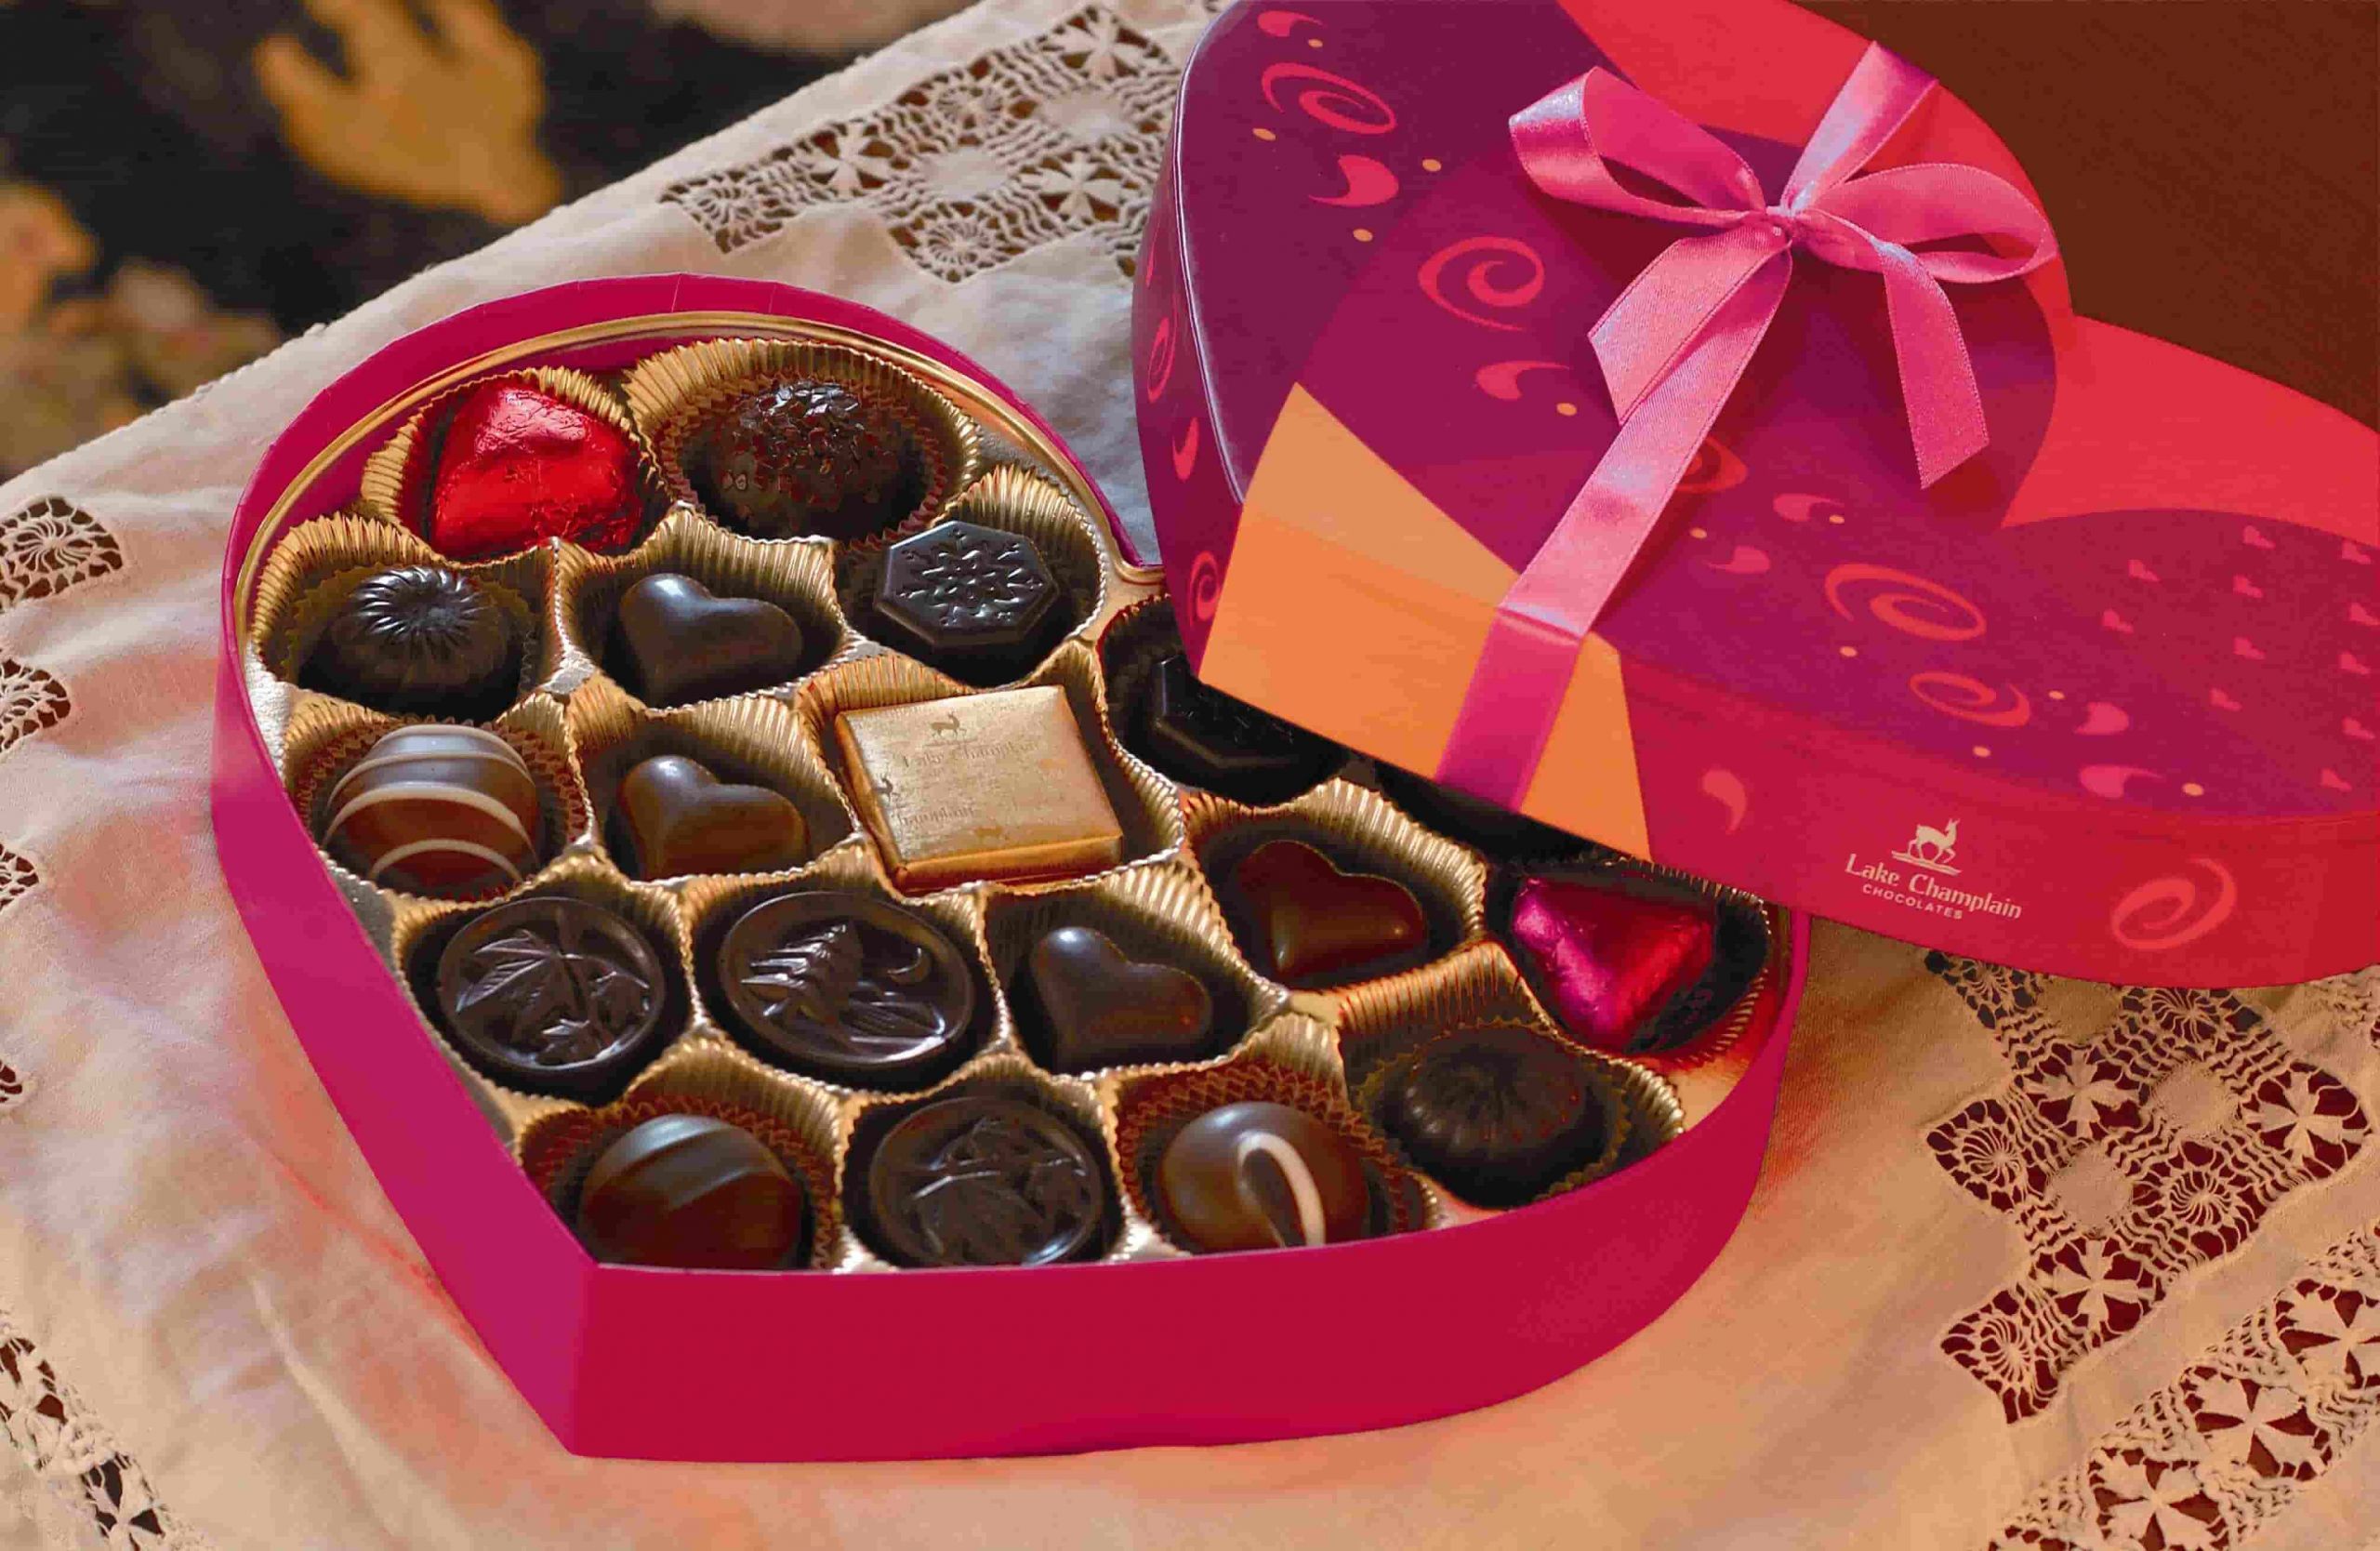 Valentines Candy Gift Ideas
 Mesmerizing Valentine s Day Chocolate & Chocolate Gift